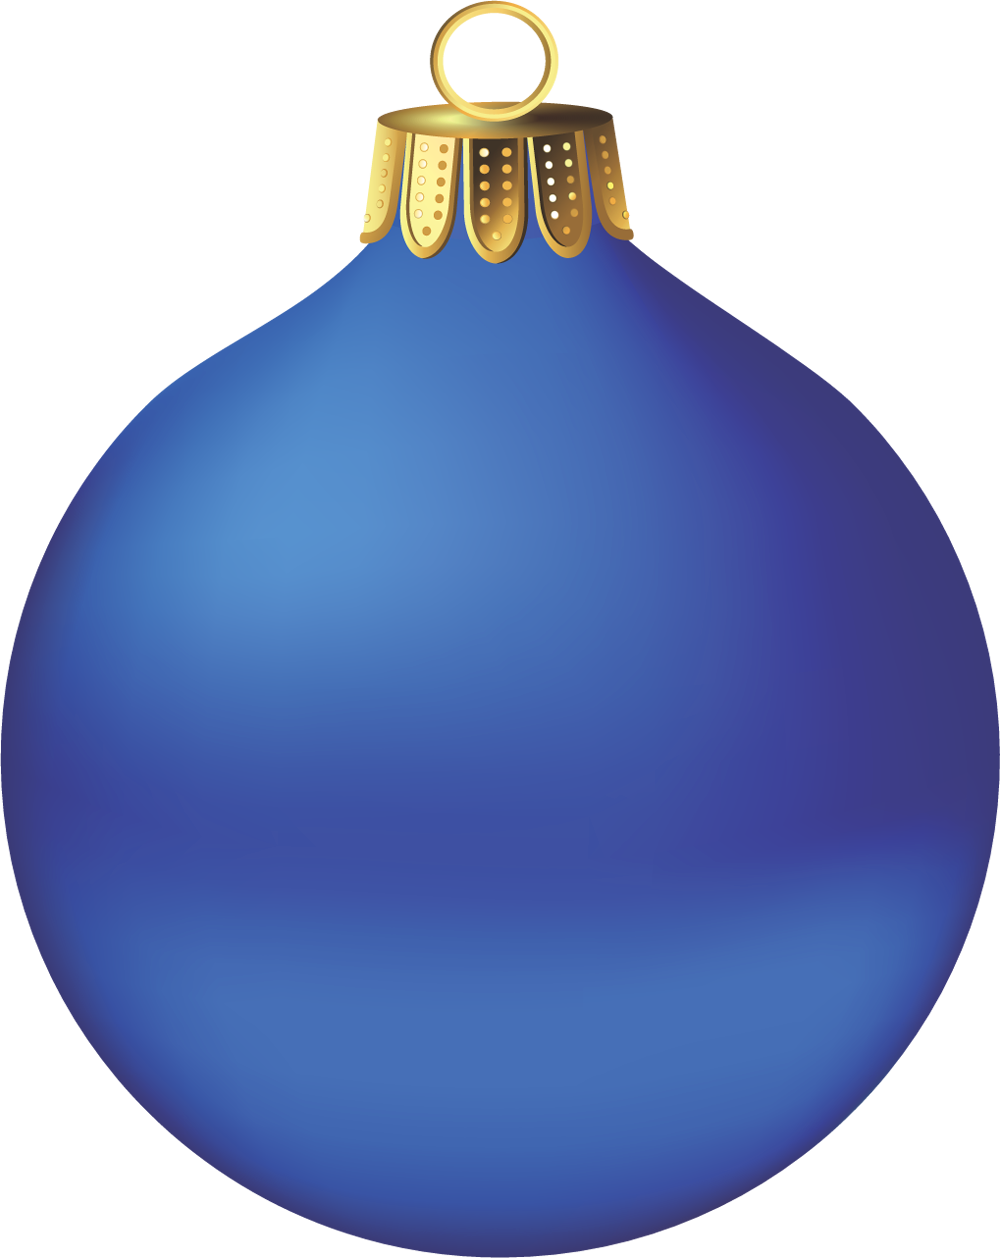 Xmas Stuff For  Christmas Ornaments Hanging Png